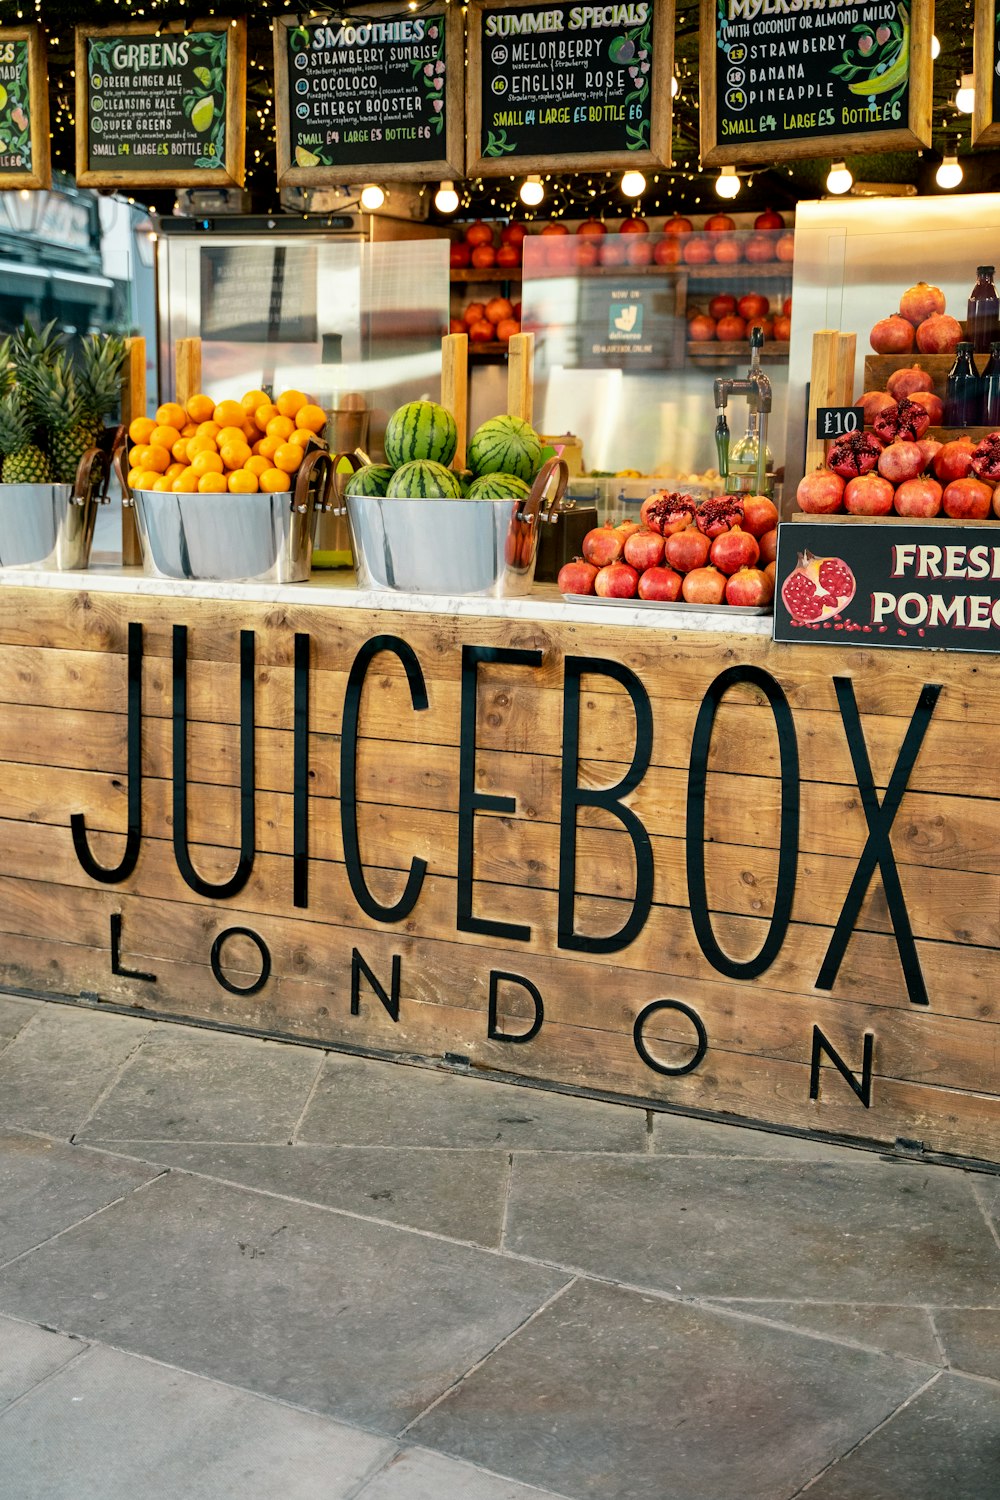 a fruit stand with a sign that says juicingbox london